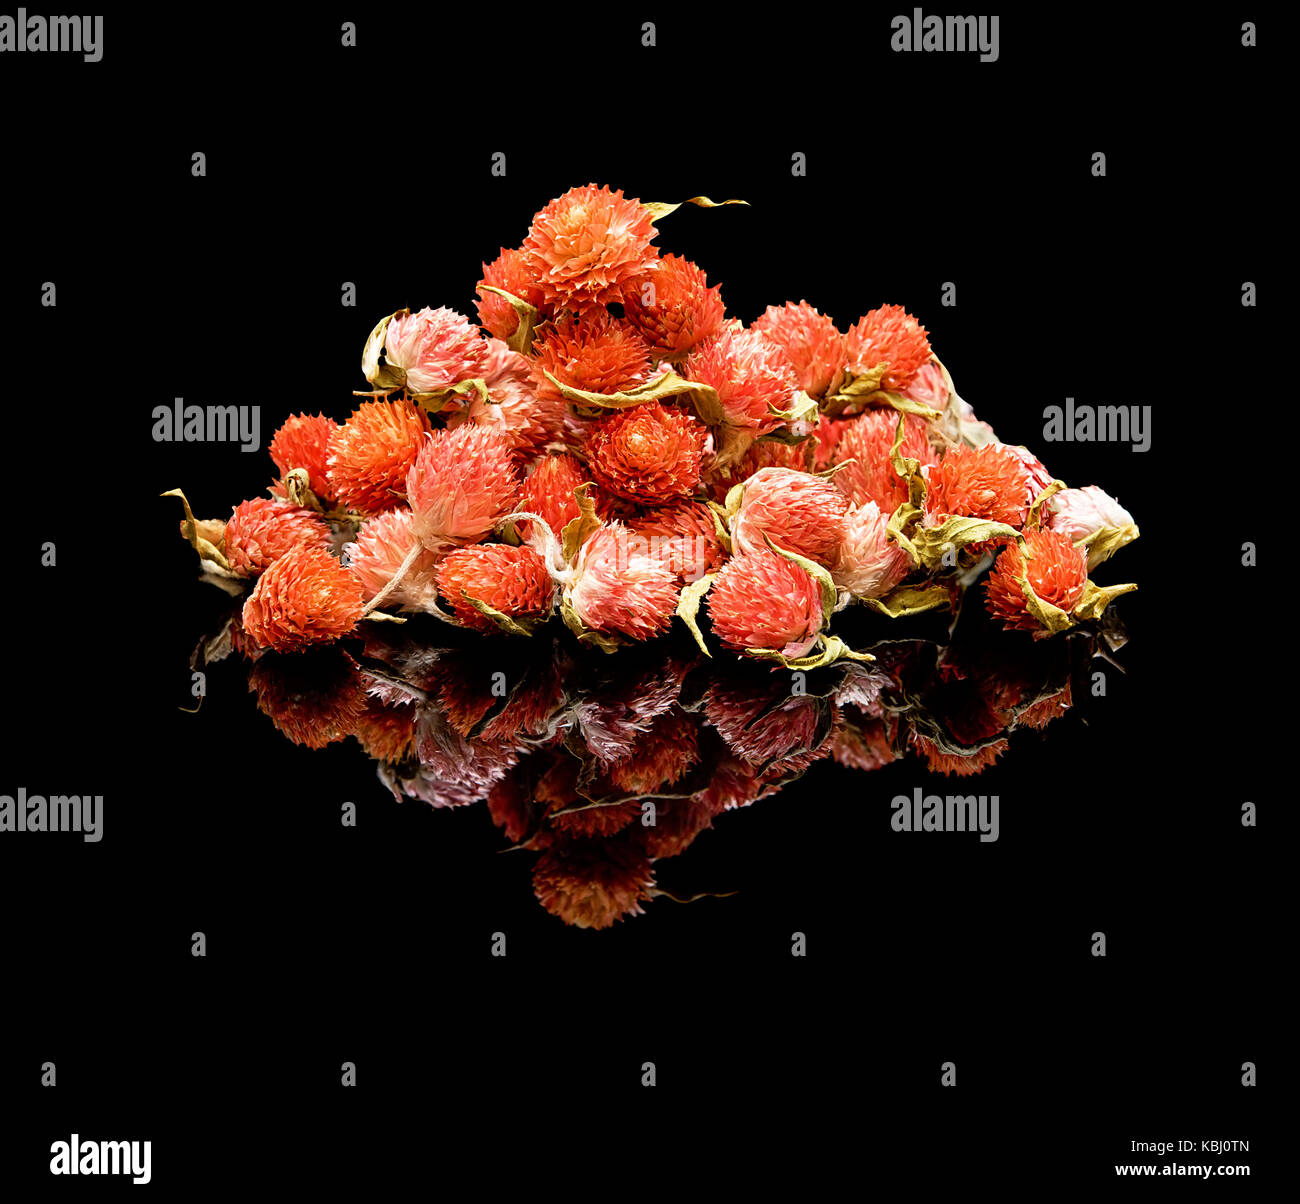 Flower tea. Chinese tea additive for brewing. On a black glossy background with real reflection. Pile of dried flowers Gomphrena or Globe amaranths. Stock Photo